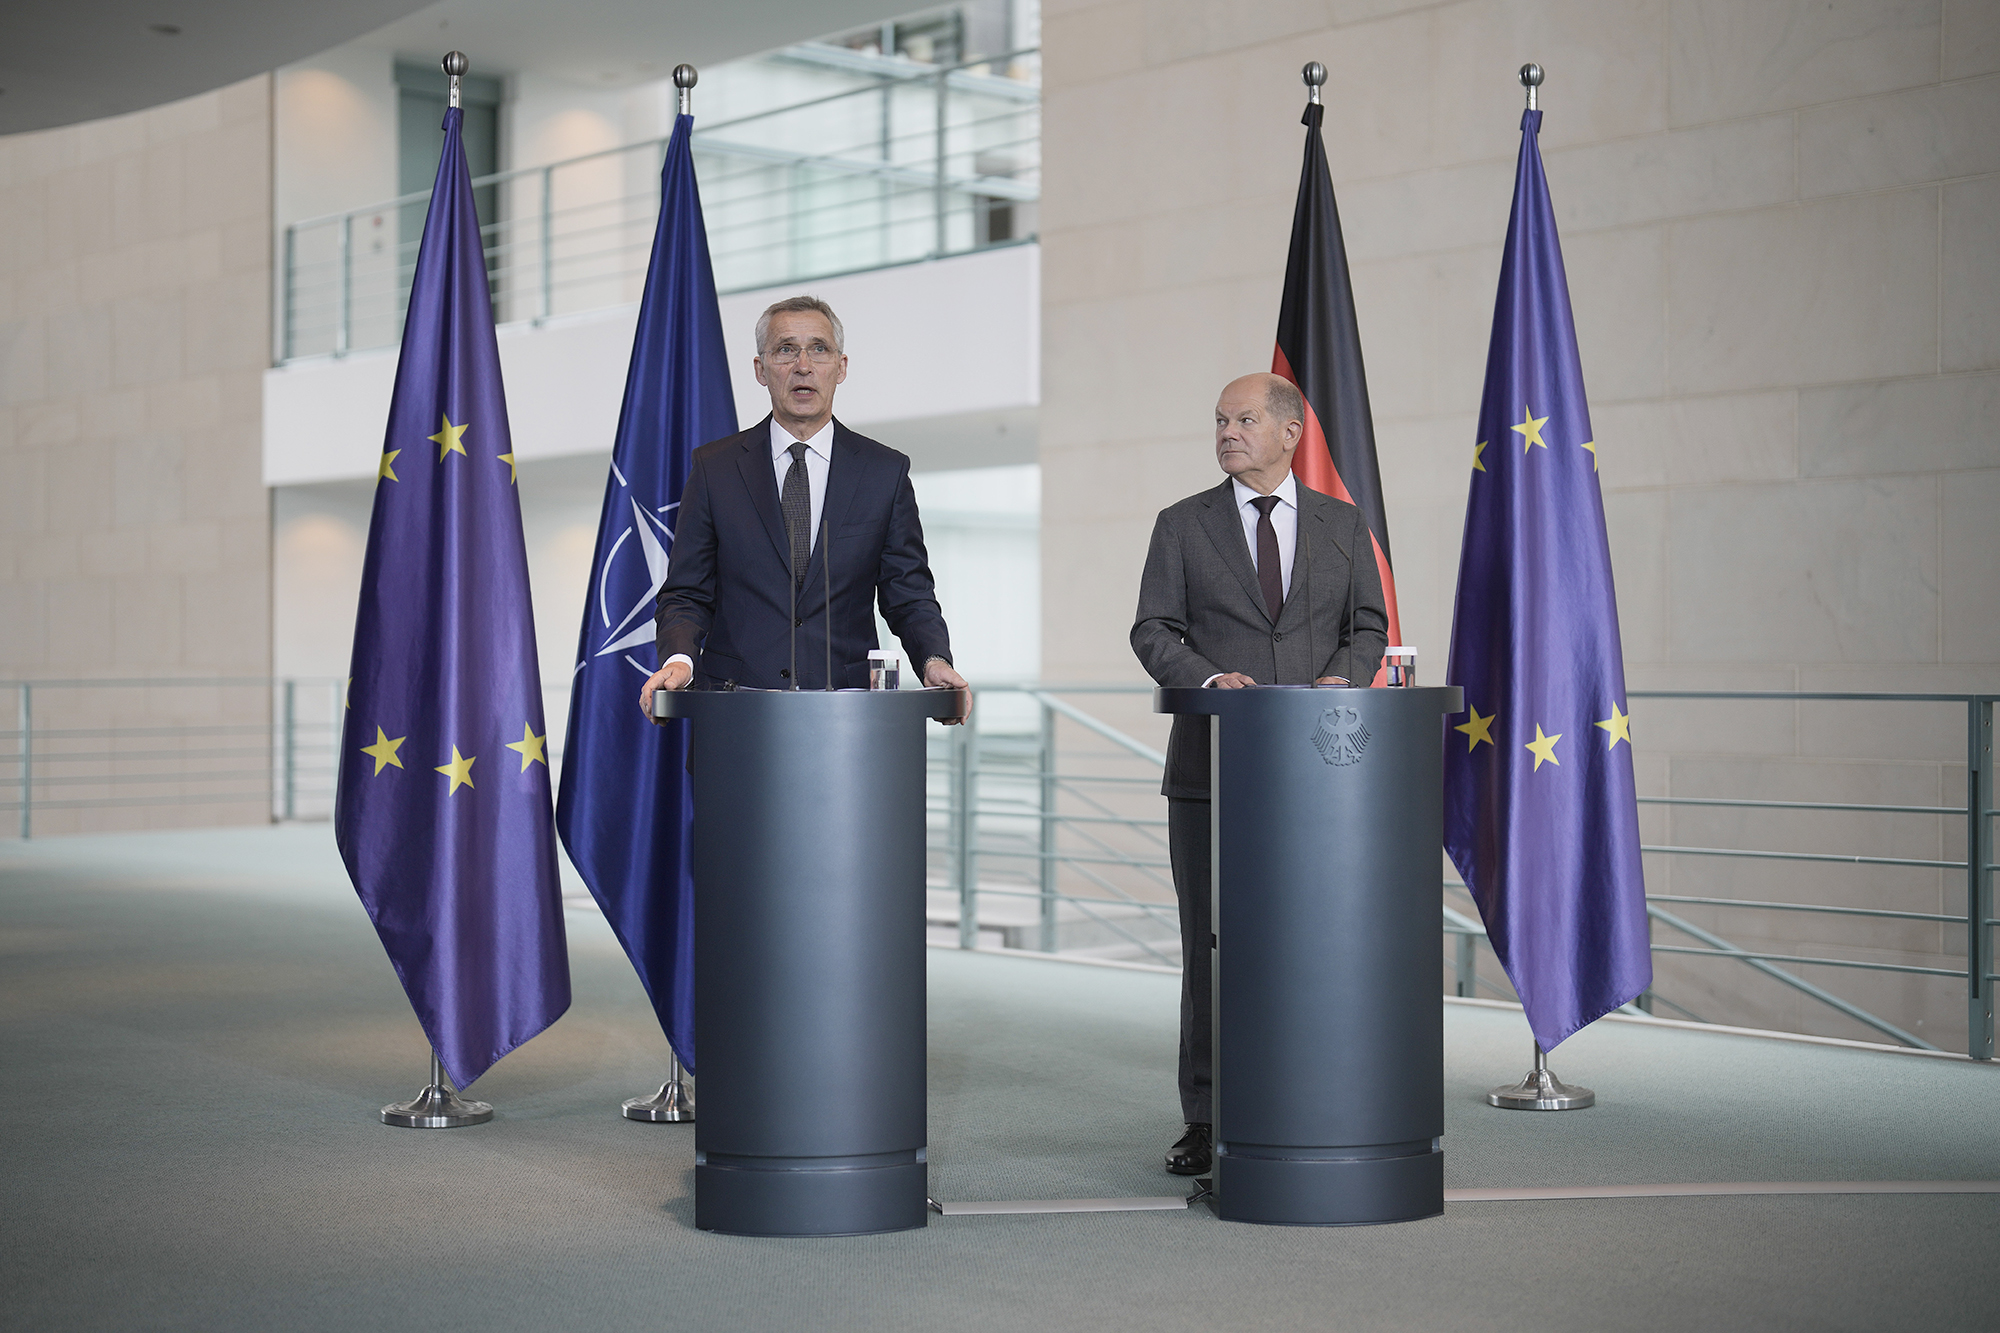 German Chancellor Olaf Scholz, right, and NATO Secretary General Jens Stoltenberg brief the media after a meeting at the Chancellery in Berlin, Germany, on June 19.